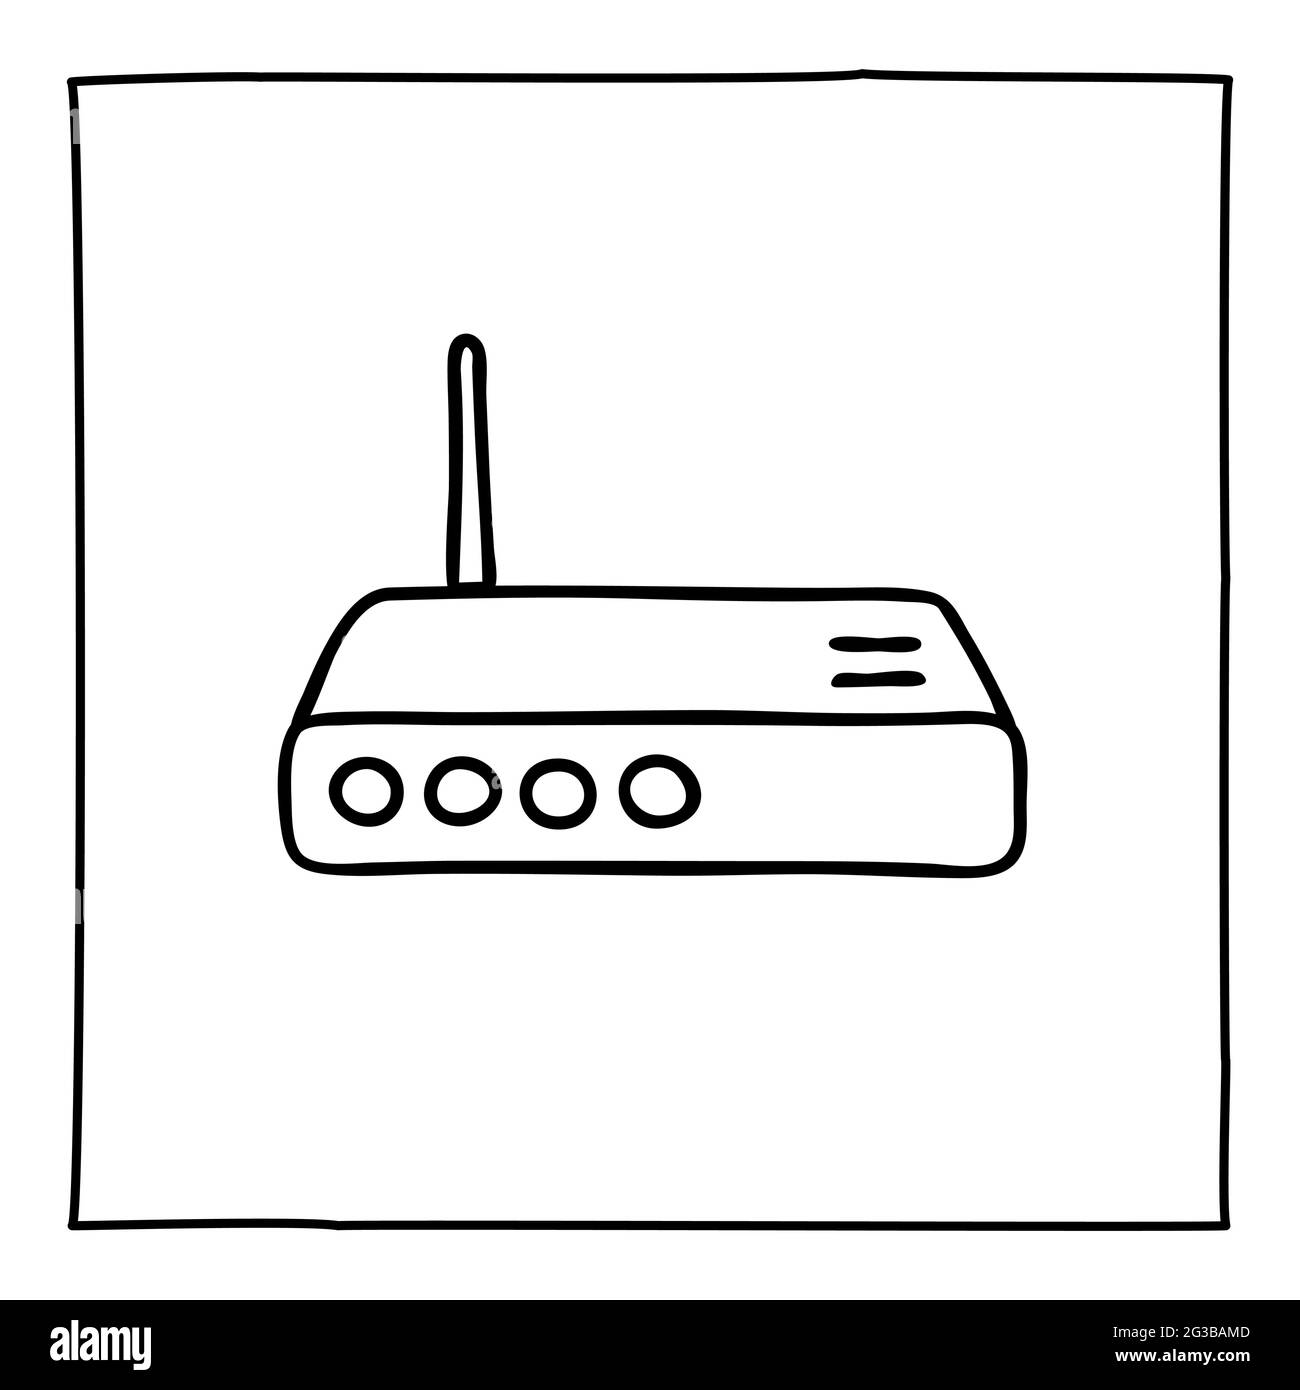 Drawing router internet connection modem Black and White Stock Photos &  Images - Alamy